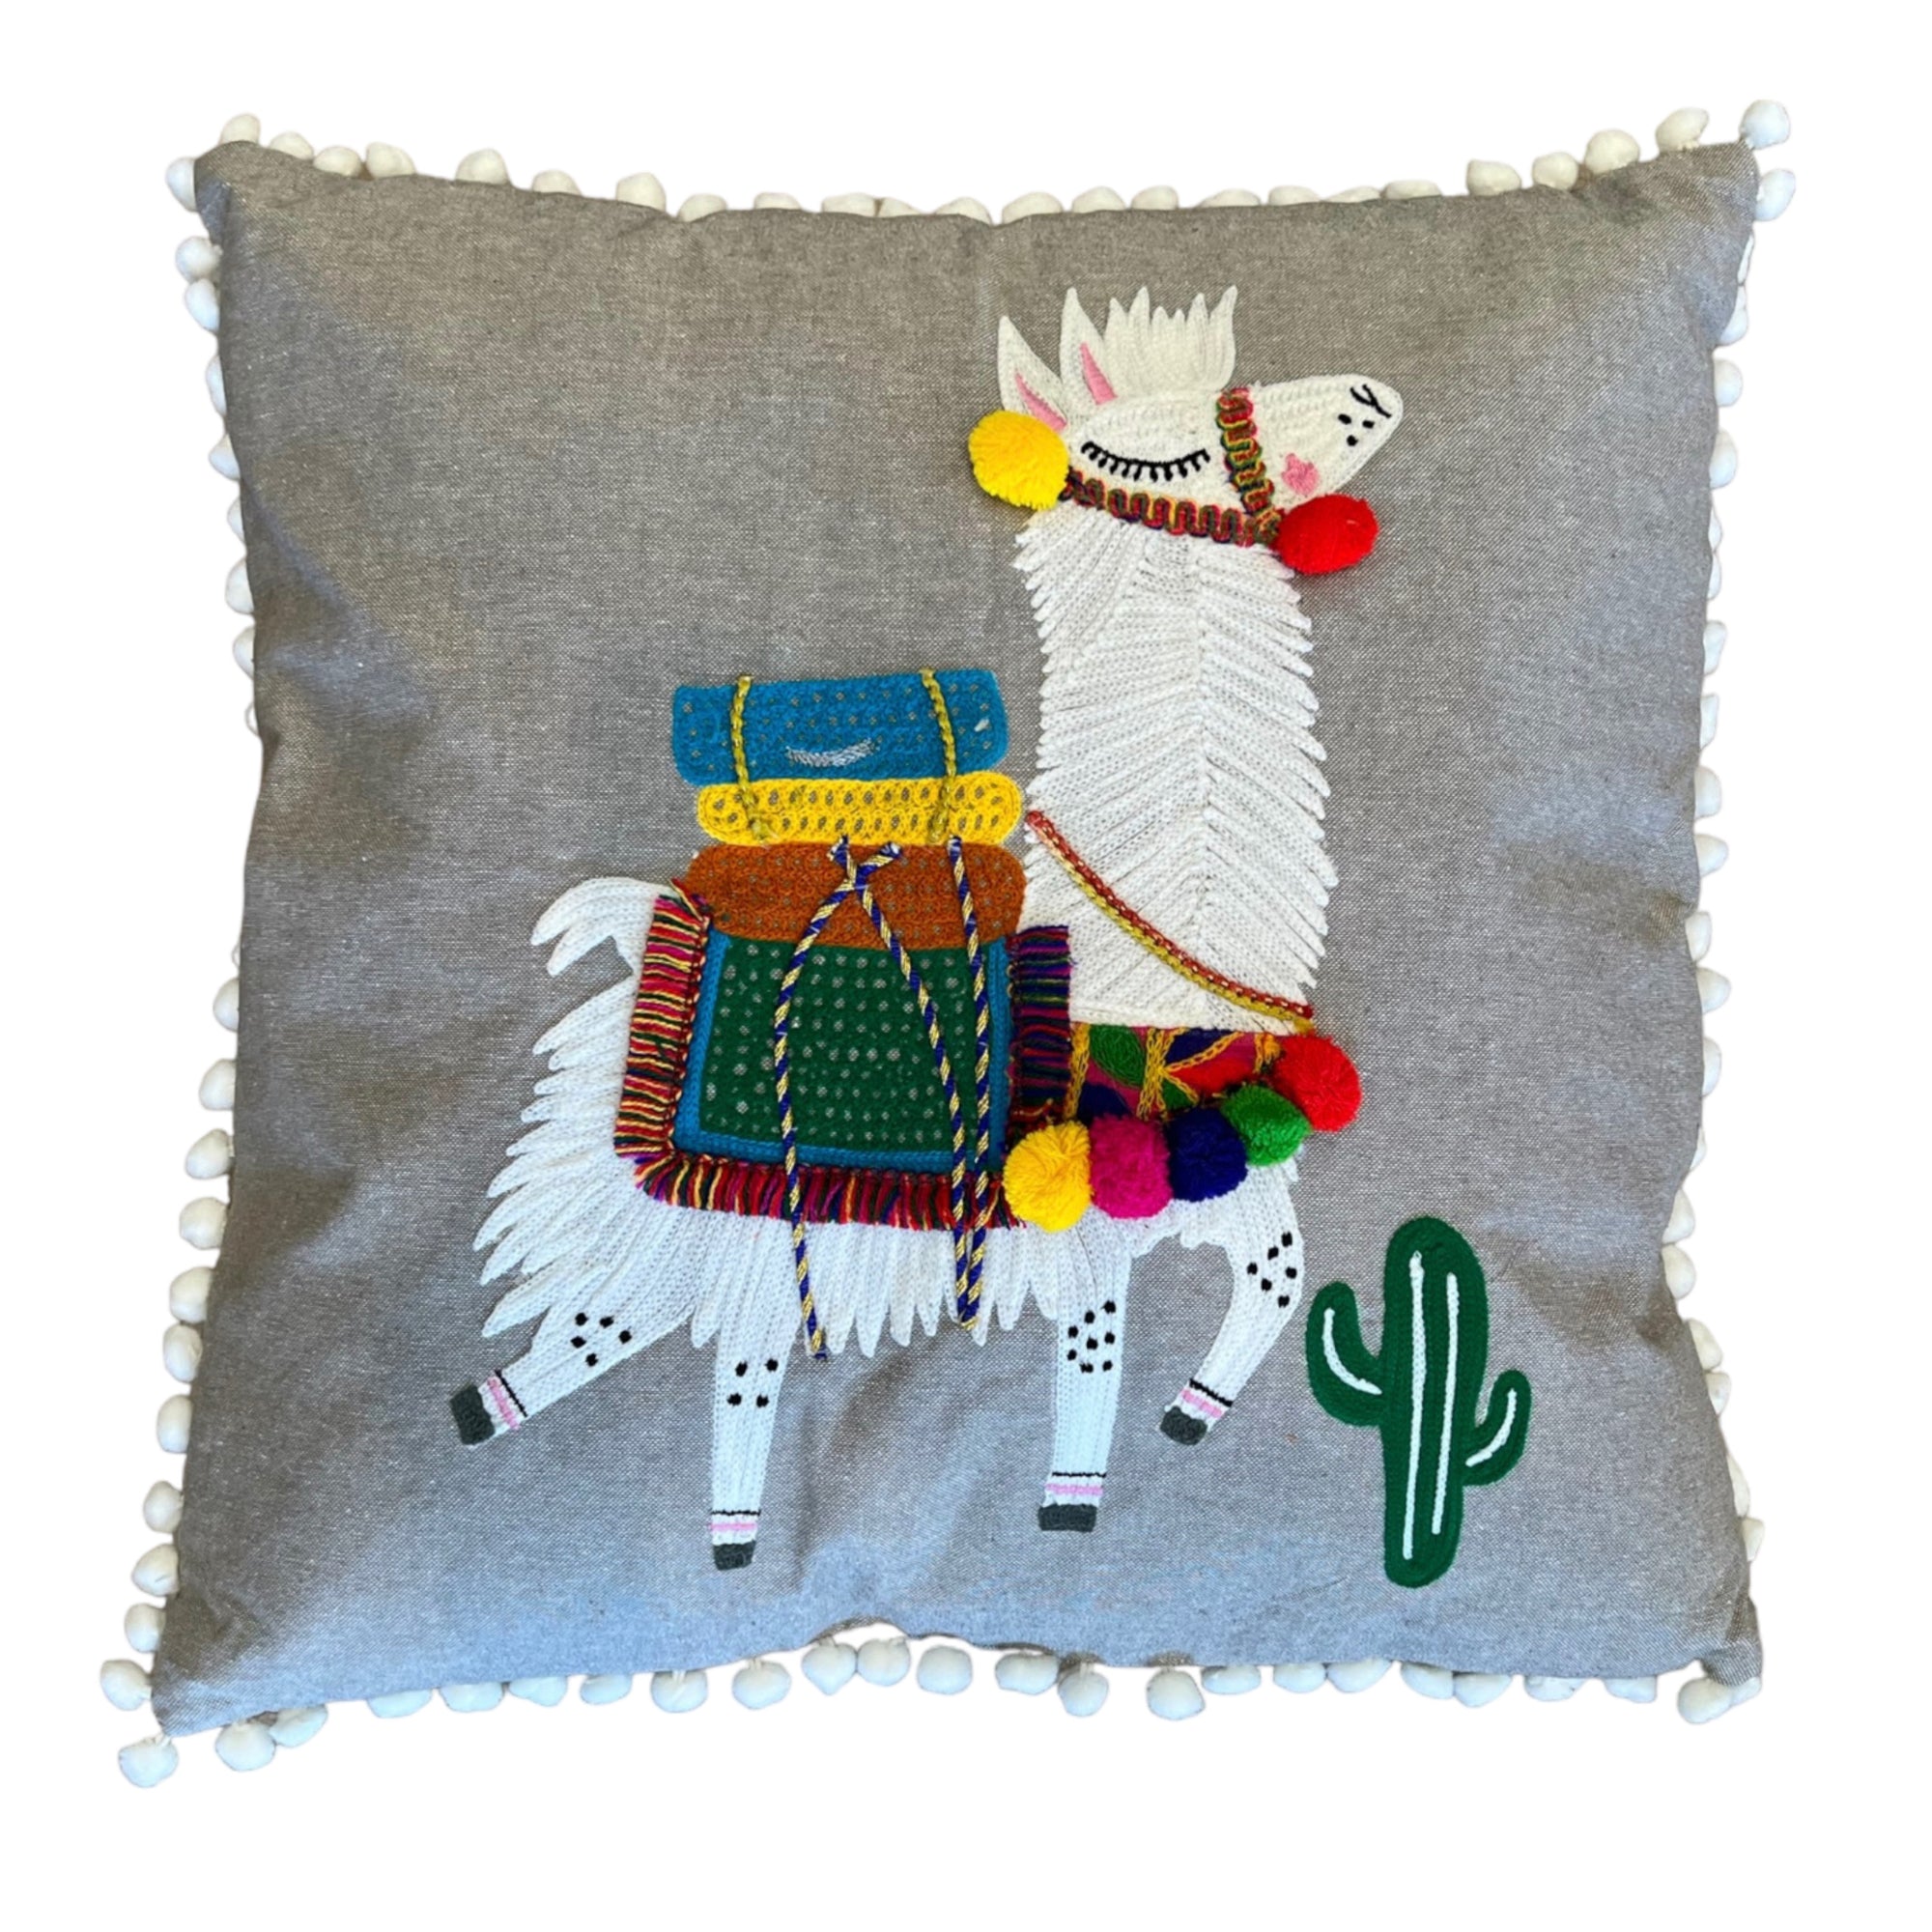 Embroidered Lama Pillow with Pom Poms